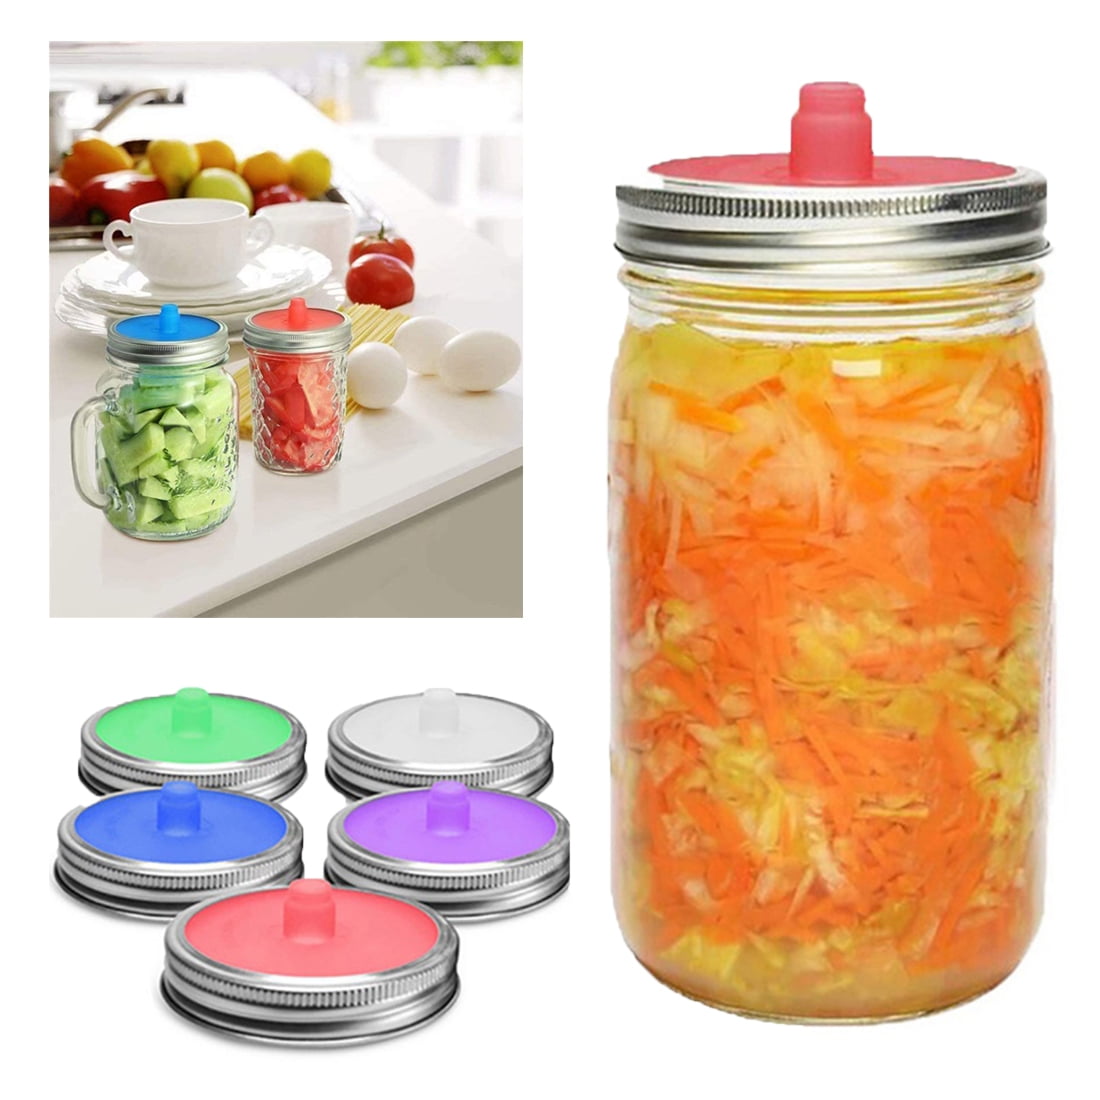 Set of 8 Wide Mouth Mason Jar Fermenting Lids for Ball Mason Jar and More Kimchi 4pcs Food-Grade Silicone Airlock Fermentation Lids and 4pcs Stainless Steel Bands for Sauerkraut Pickles 